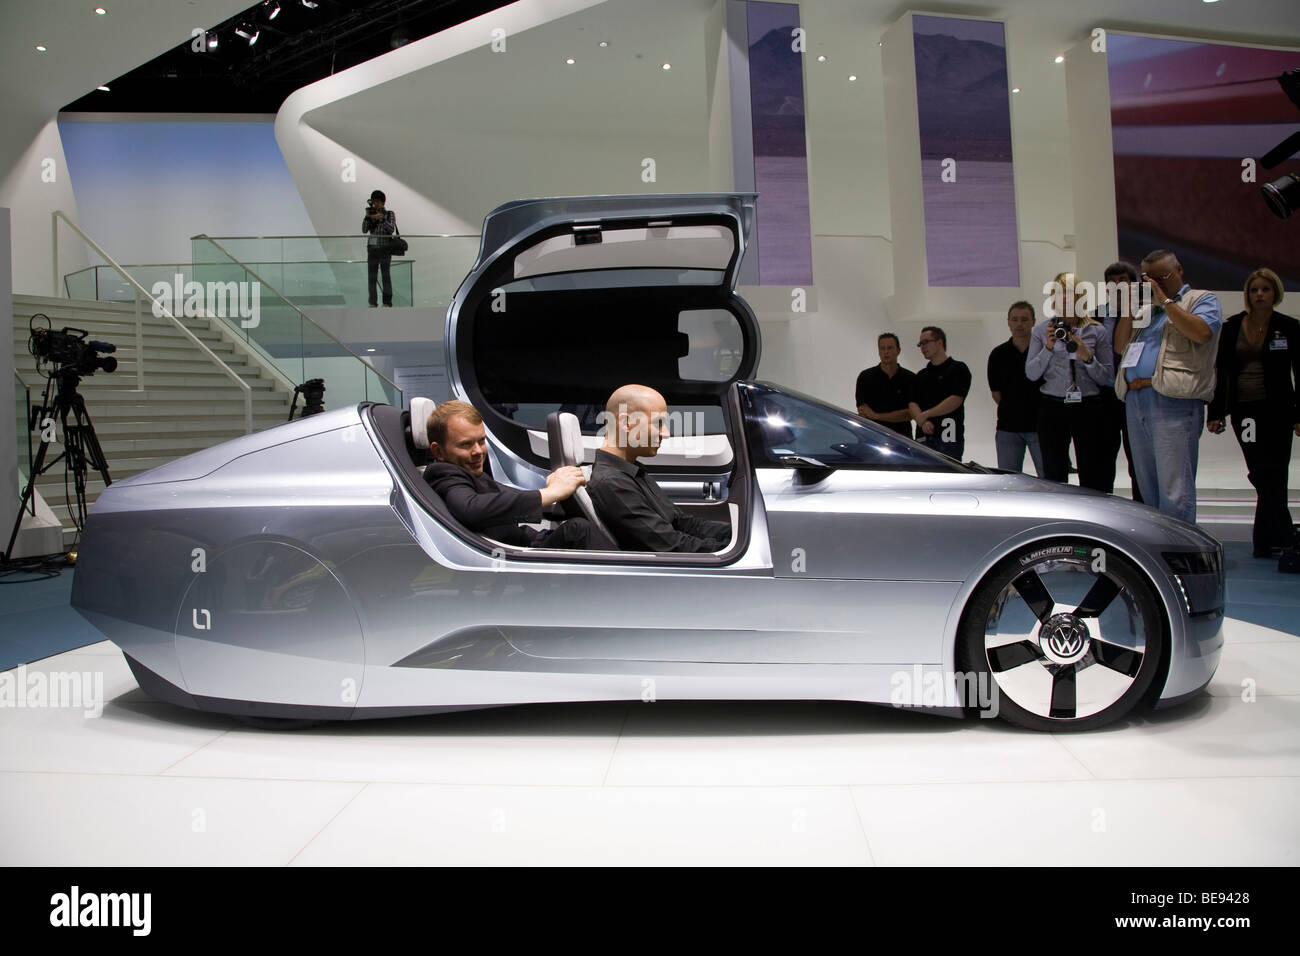 Volkswagen 170 mpg diesel hybrid two-seater L1. At a European motor show. Stock Photo